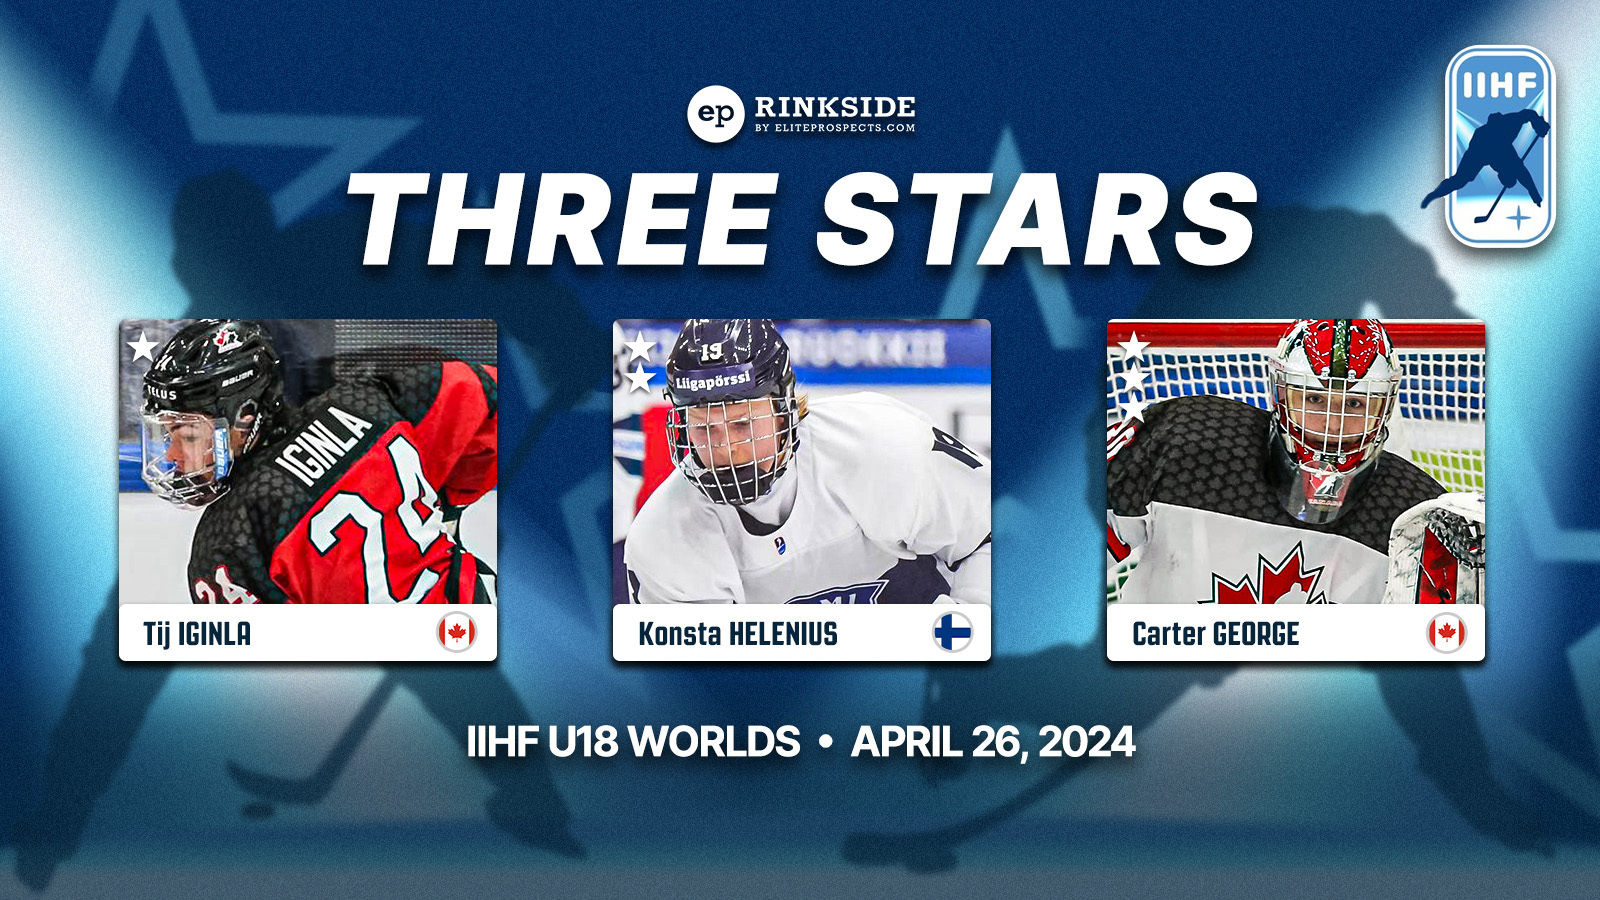 EP Rinkside's 3 Stars from Day 2 of the 2024 U18 World Hockey Championship